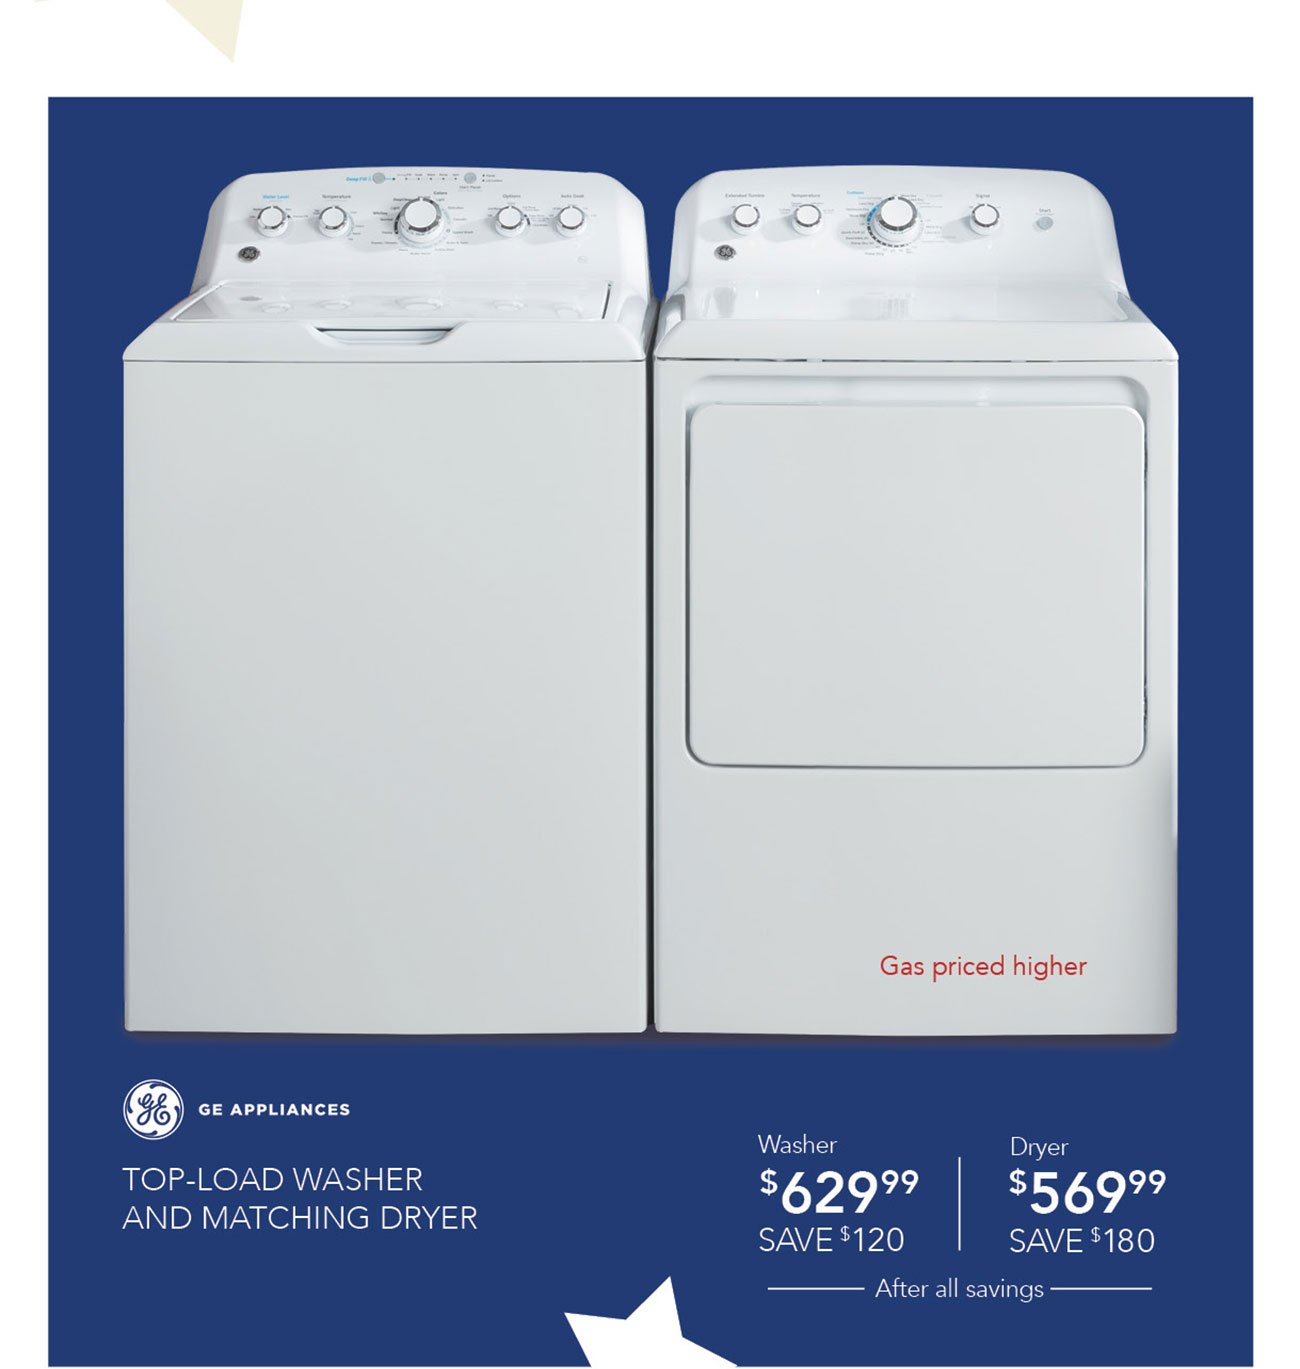 GE-Top-load-washer-dryer